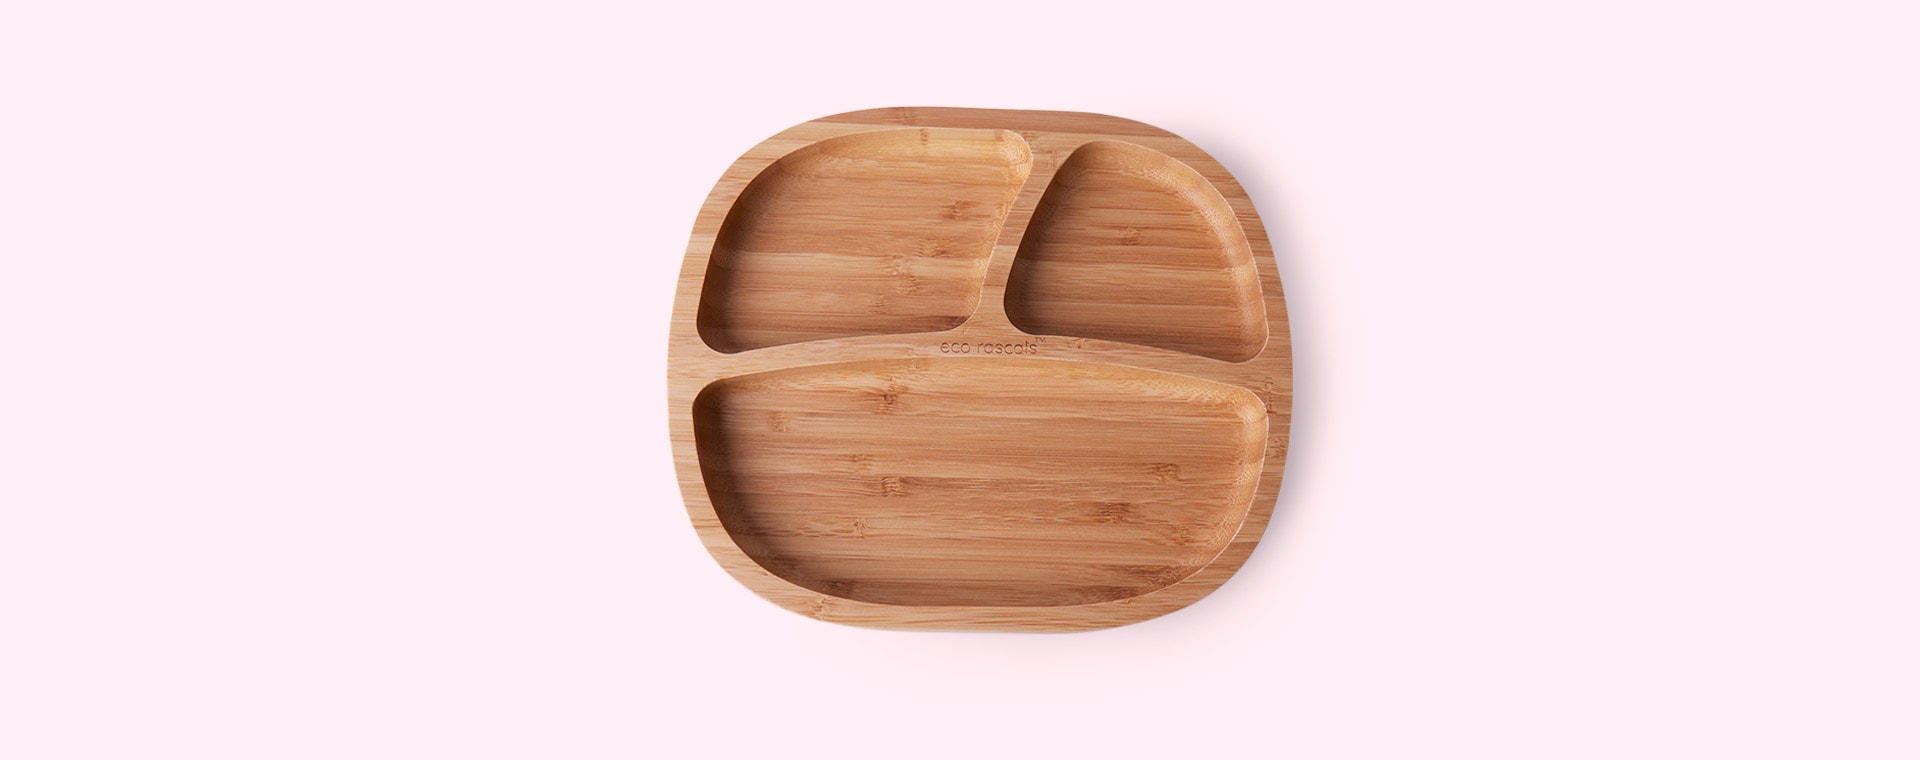 Pink eco rascals Bamboo Suction Toddler Plate